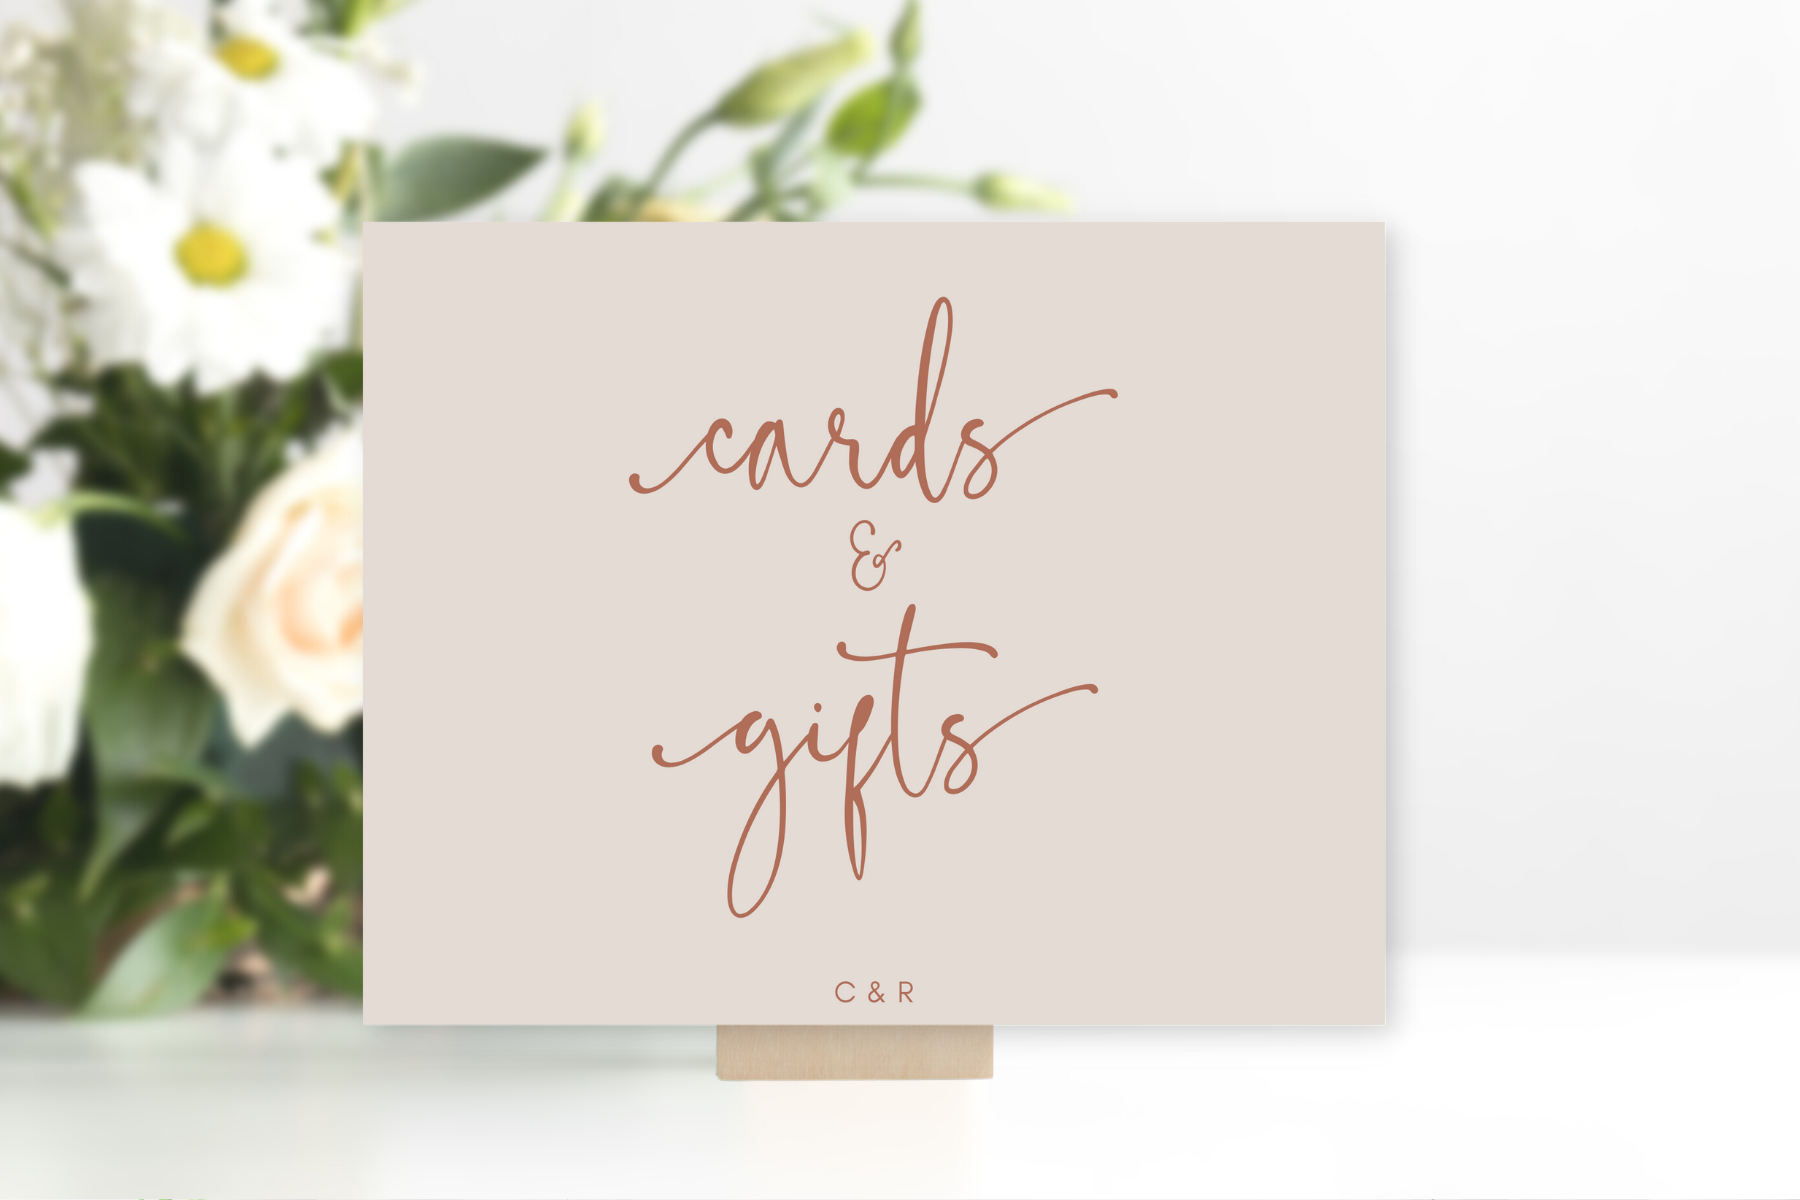 Terracotta Rust Simple Cards and Gifts Wedding Sign